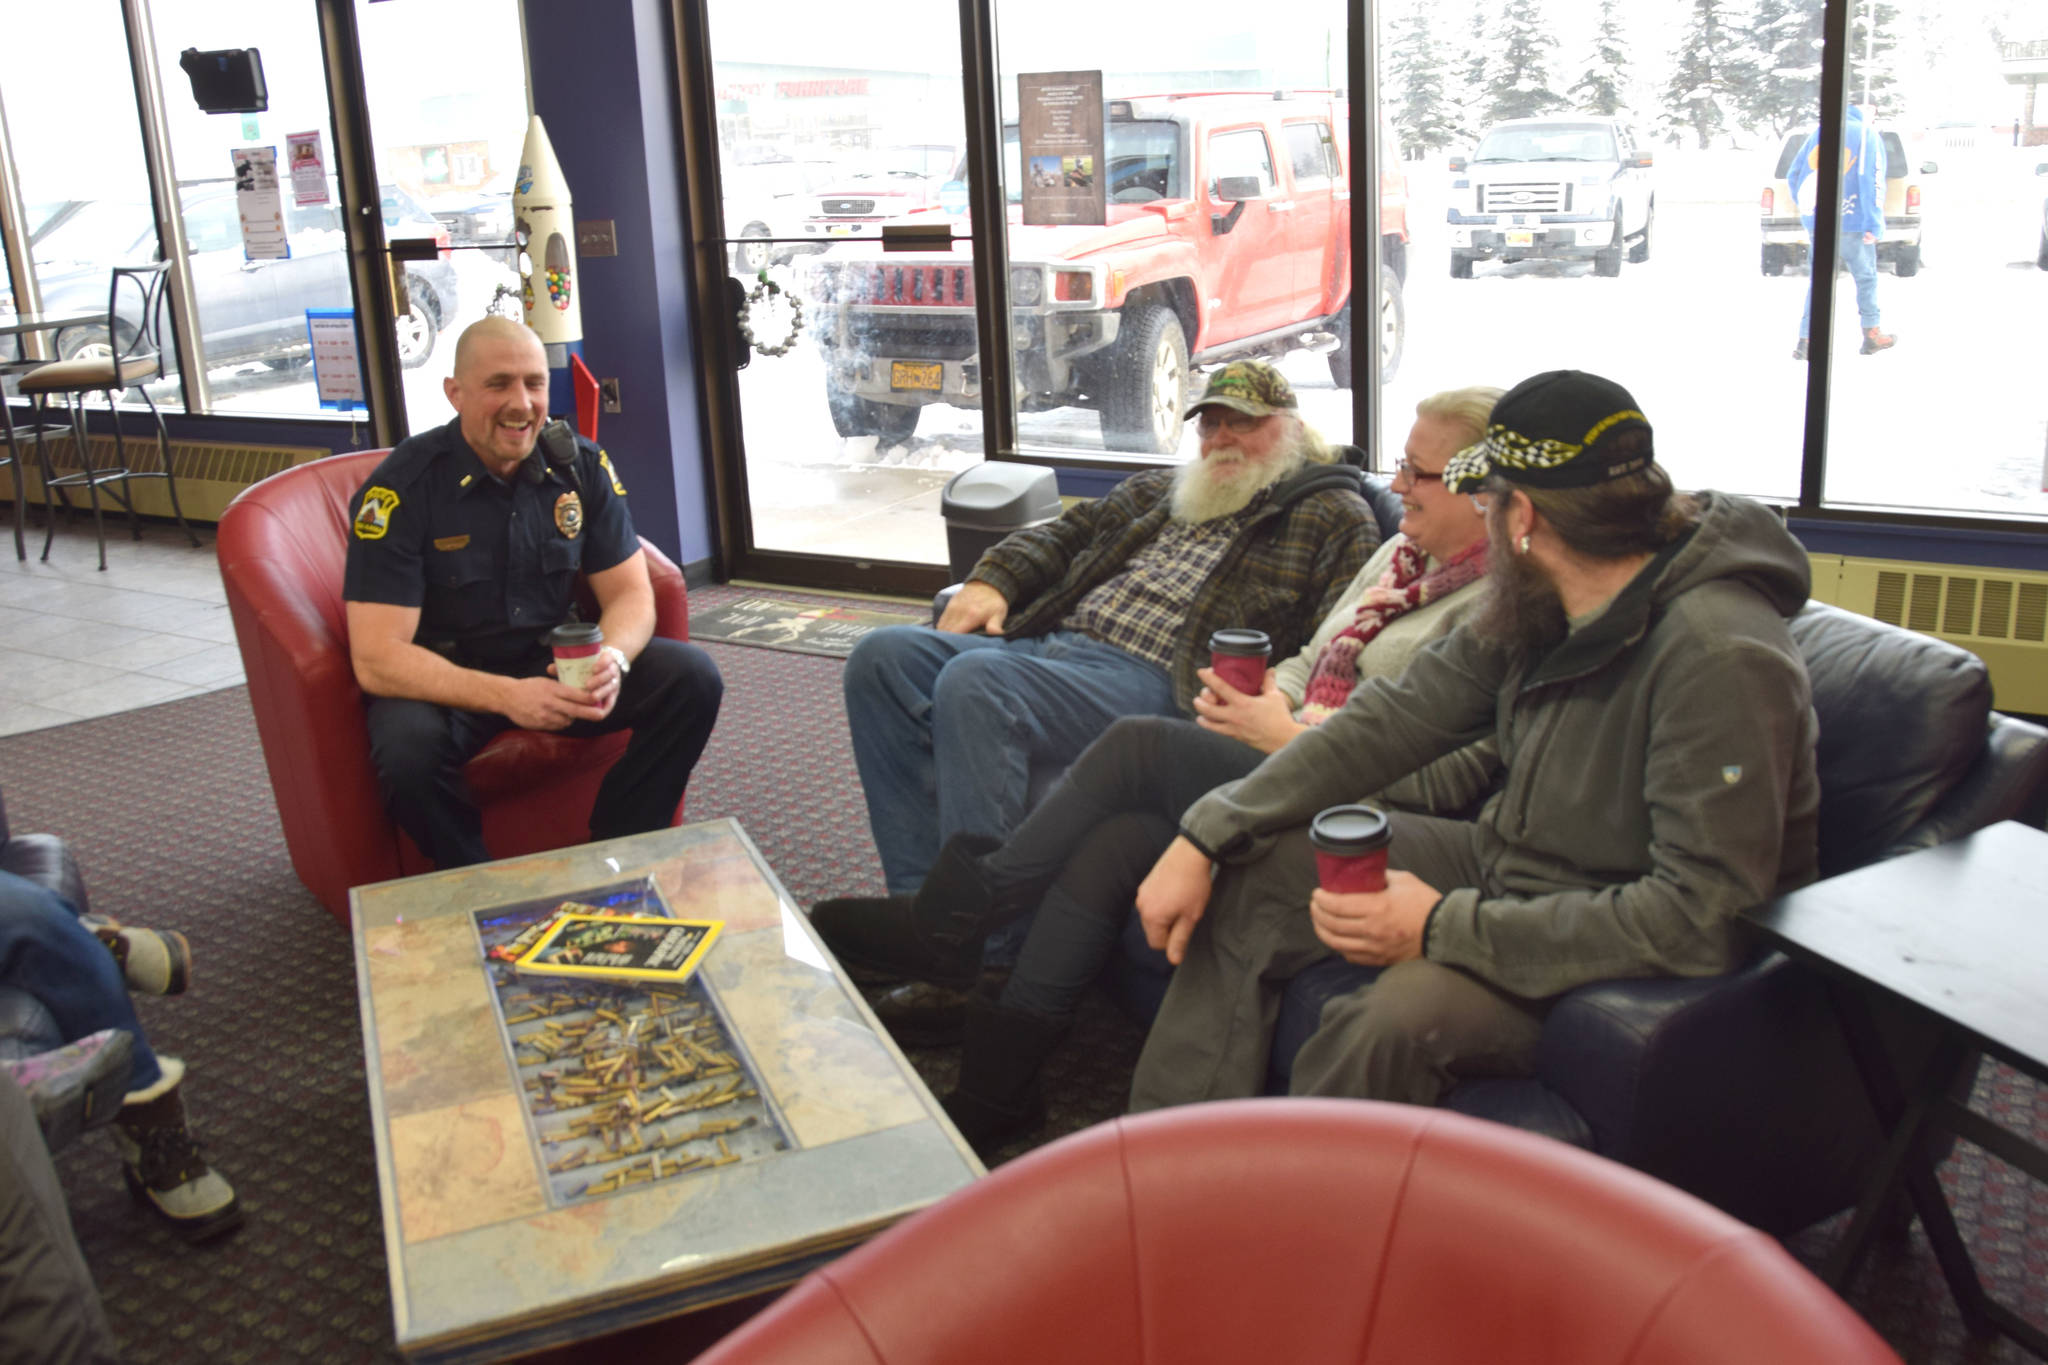 Lt. Ben Langham of the Kenai Police Department shares a laugh with members of the community at Ammo Can Coffee in Soldotna on Wednesday, Jan. 30, 2019. (Photo by Brian Mazurek/Peninsula Clarion)